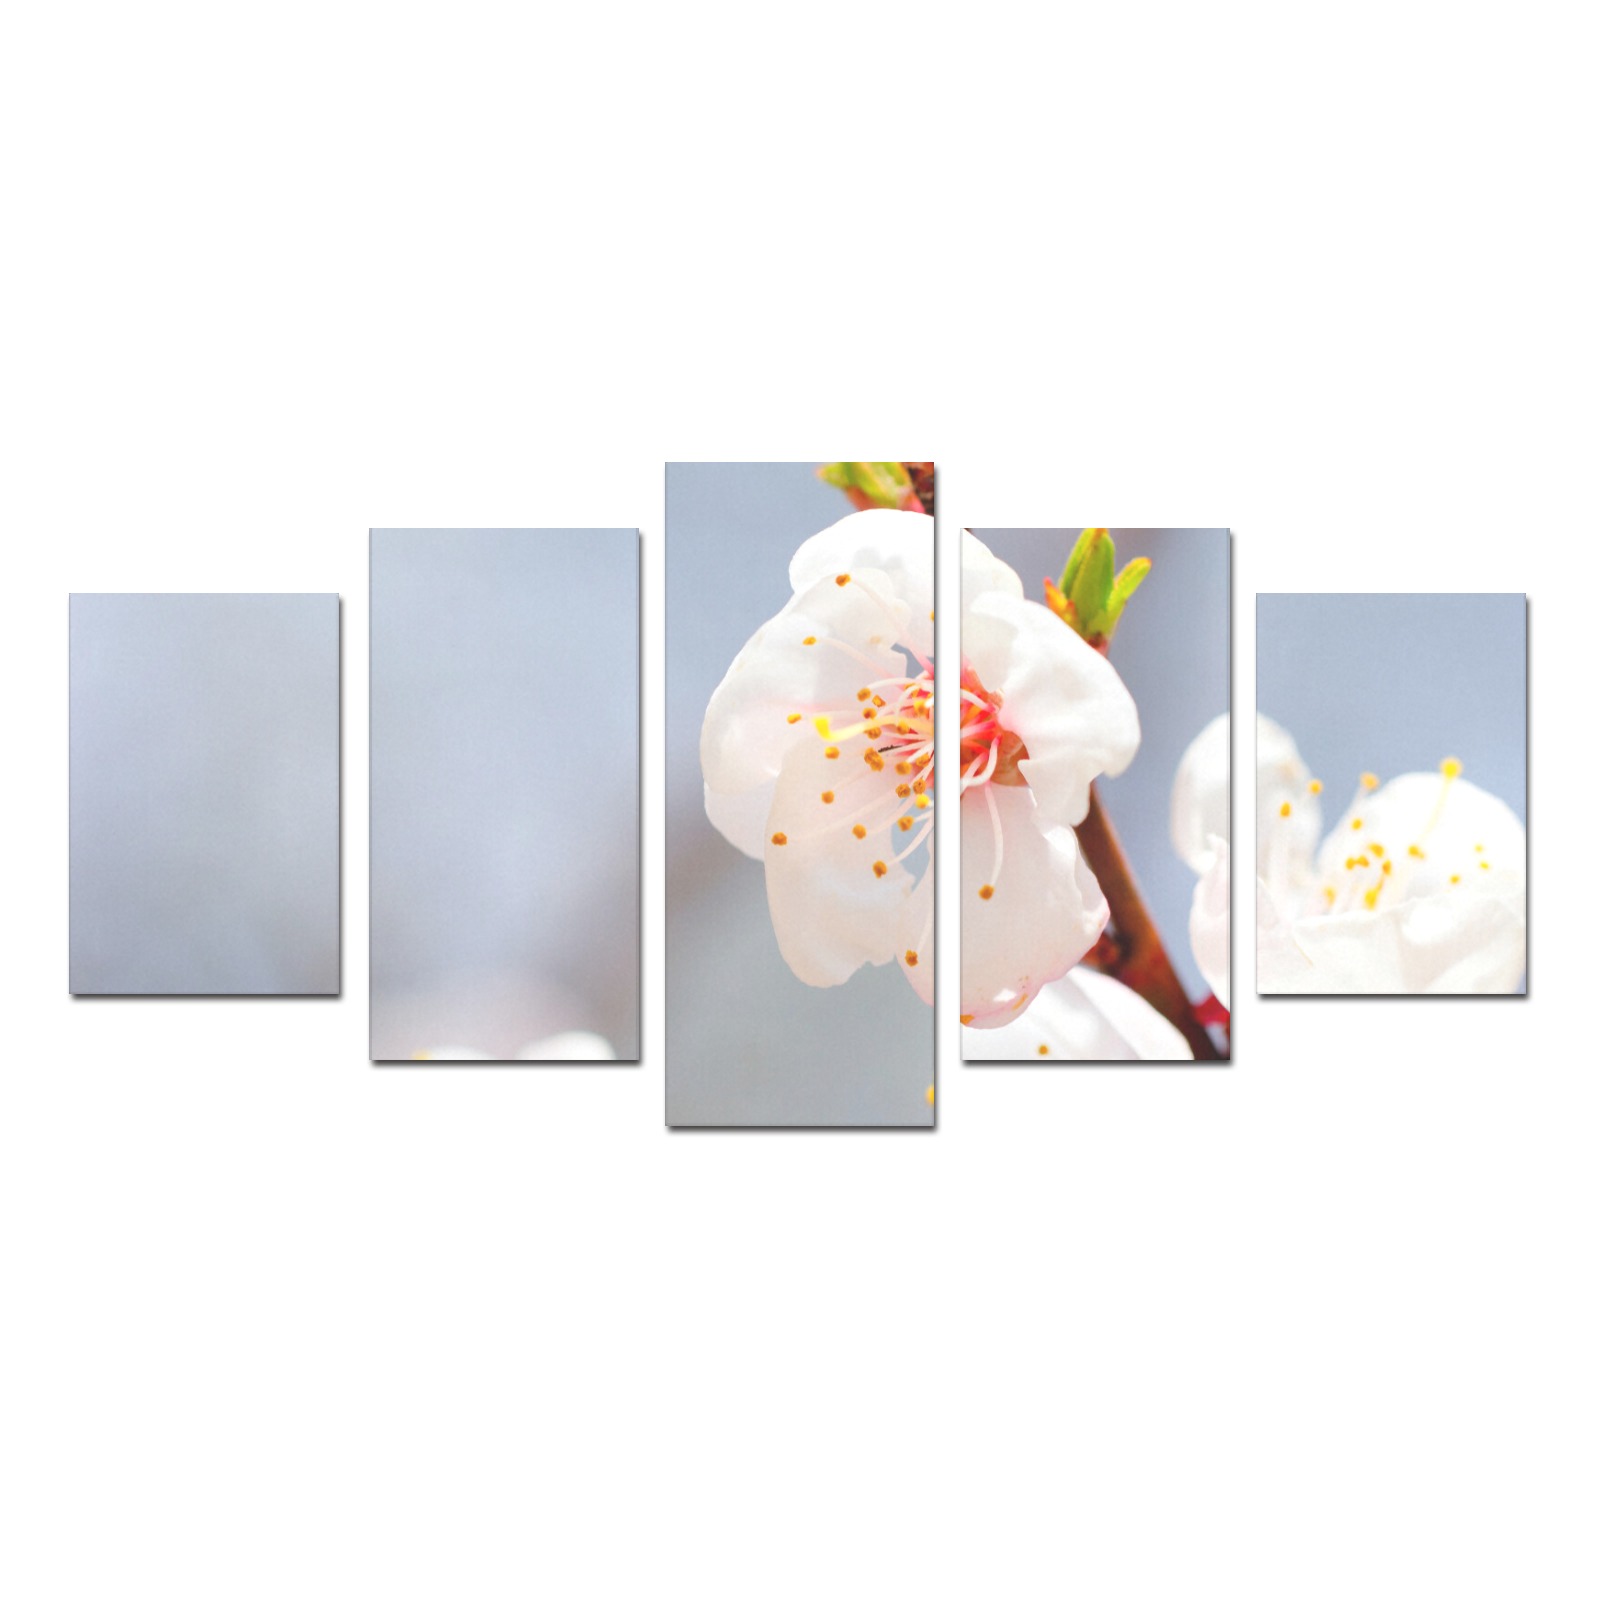 Magnificent Japanese apricot flowers on a tree. Canvas Print Sets D (No Frame)